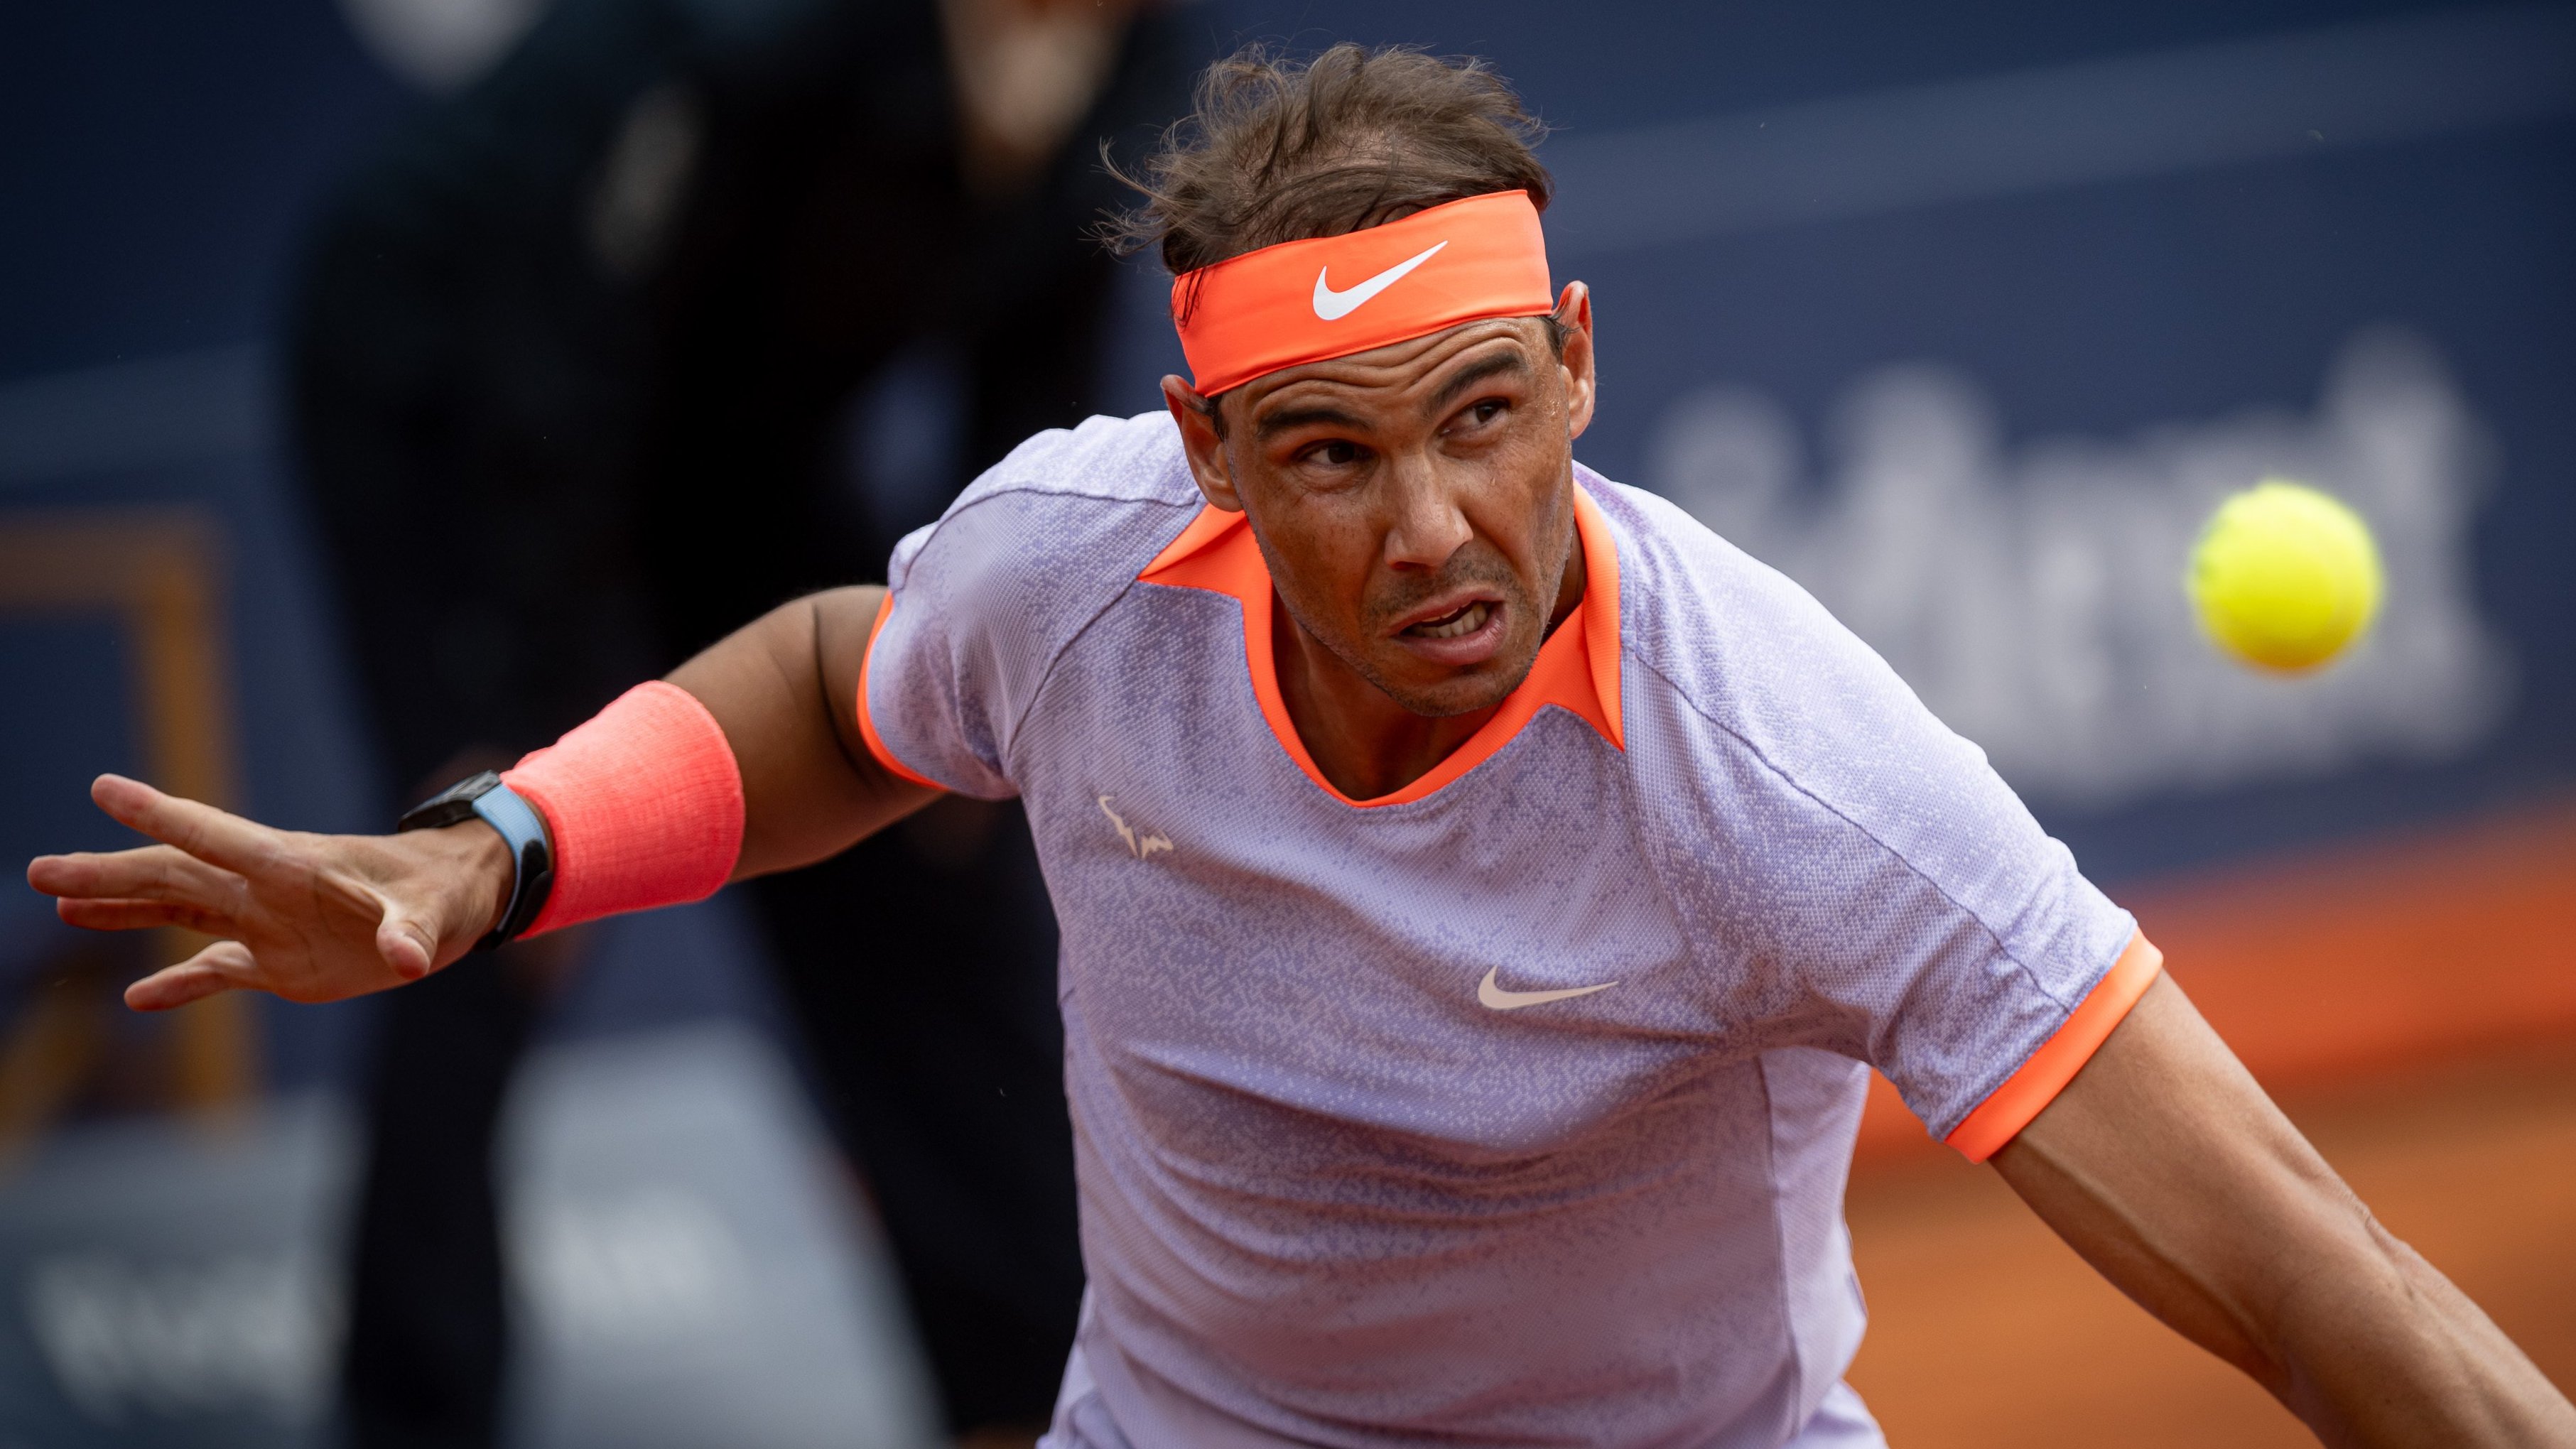 Nadal has signalled that this season could be his last on the tour